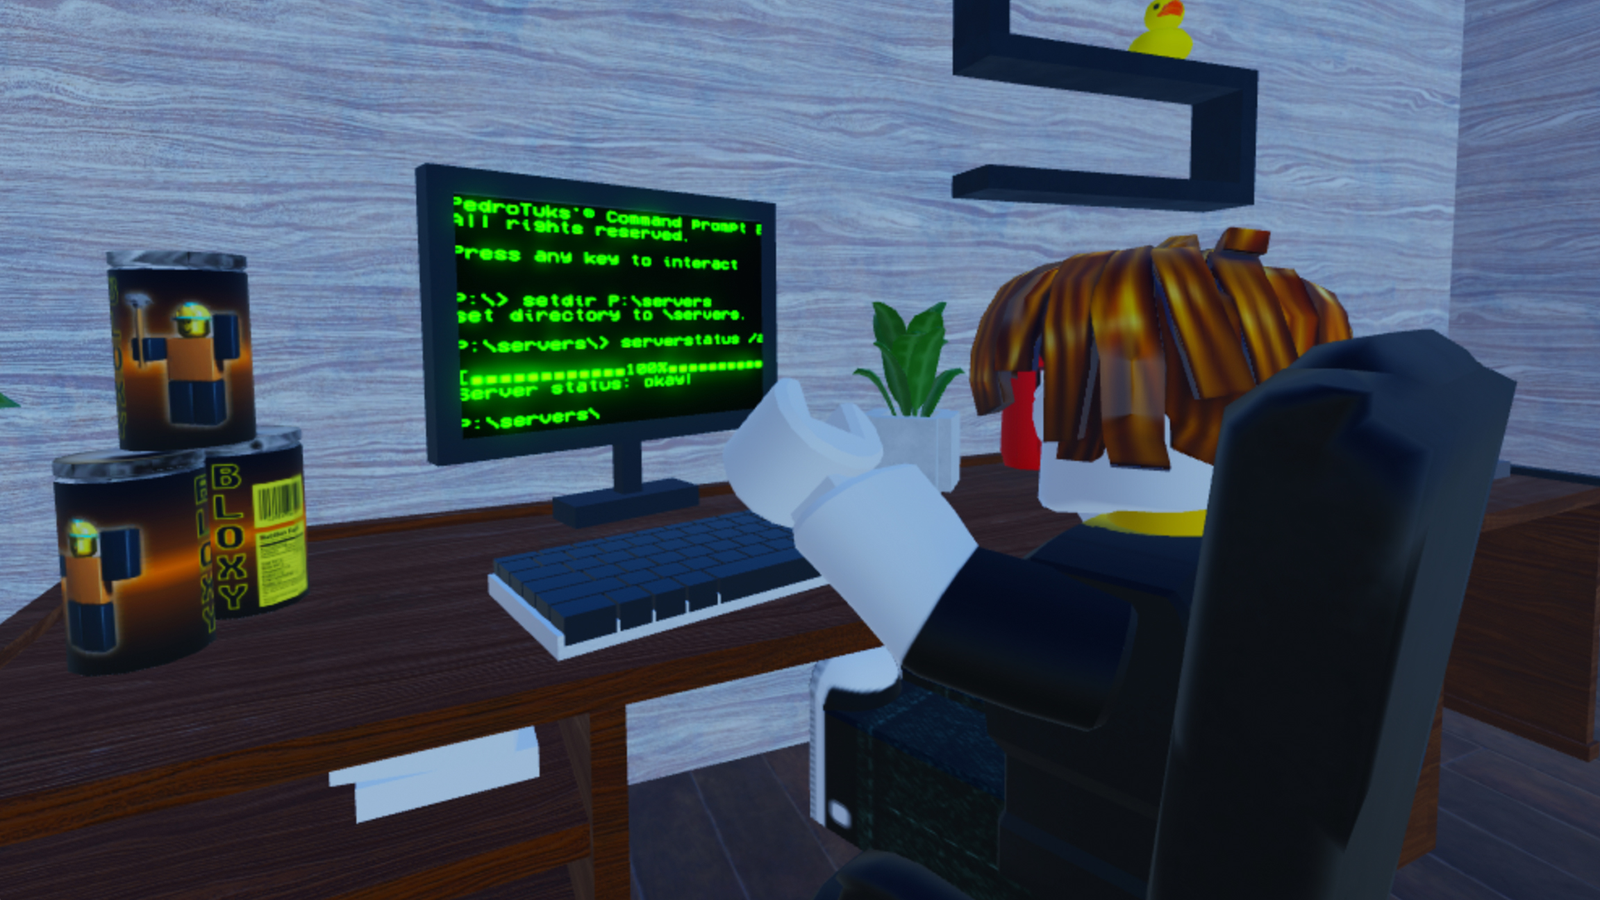 A new report on Roblox reveals how hackers and scammers are